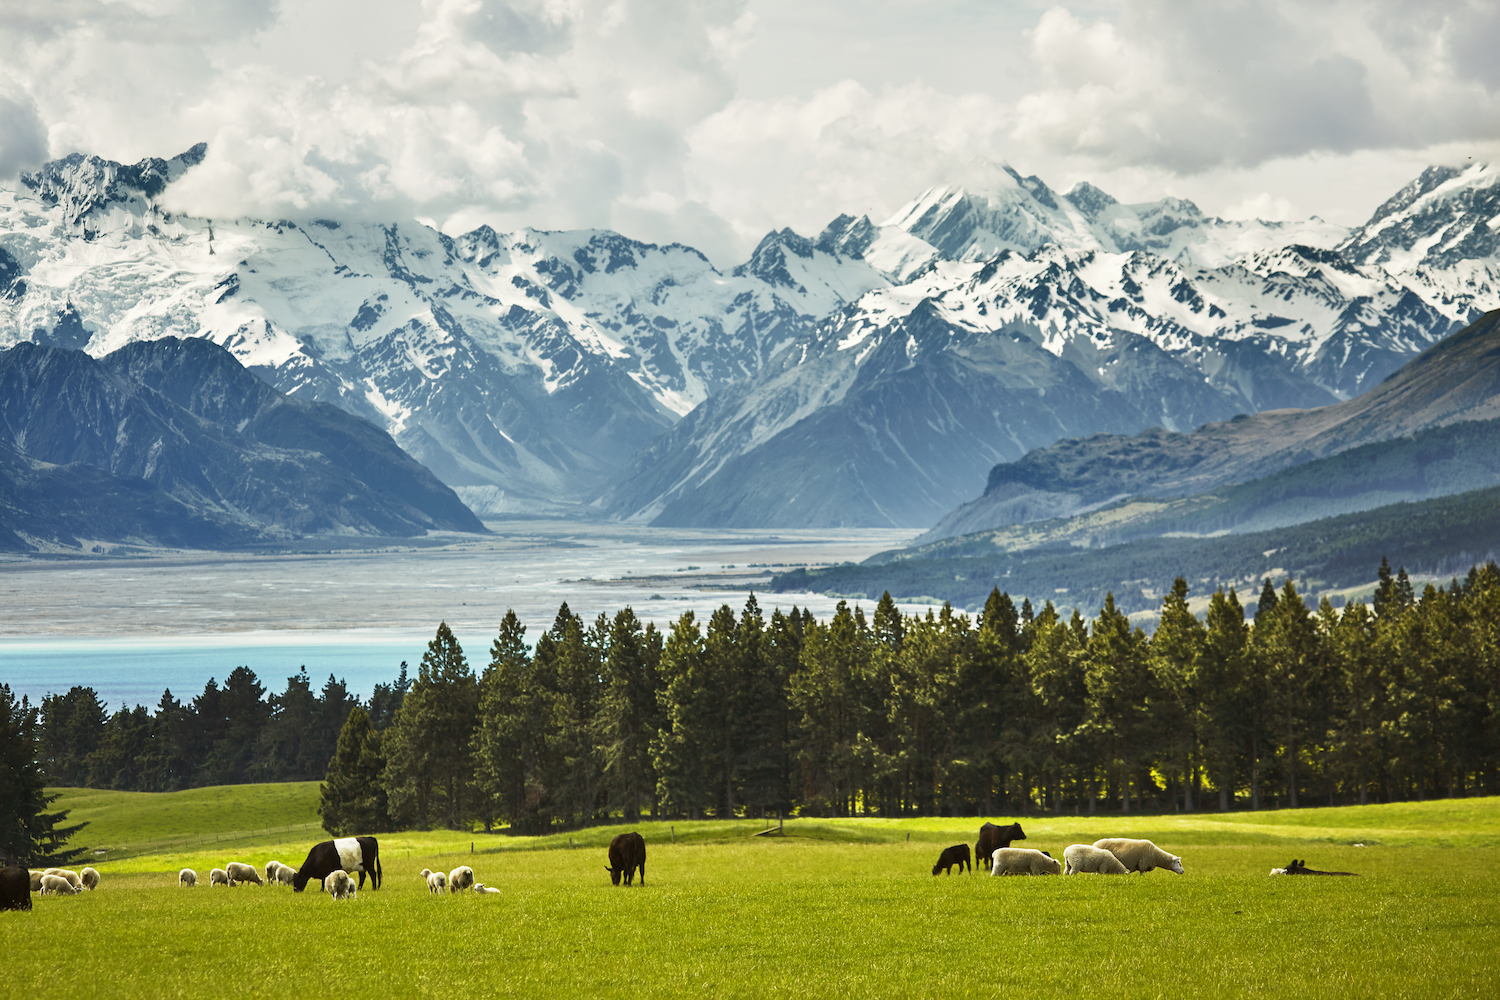 cows and sheep grazing in new zealand field with lake and mountains in the background